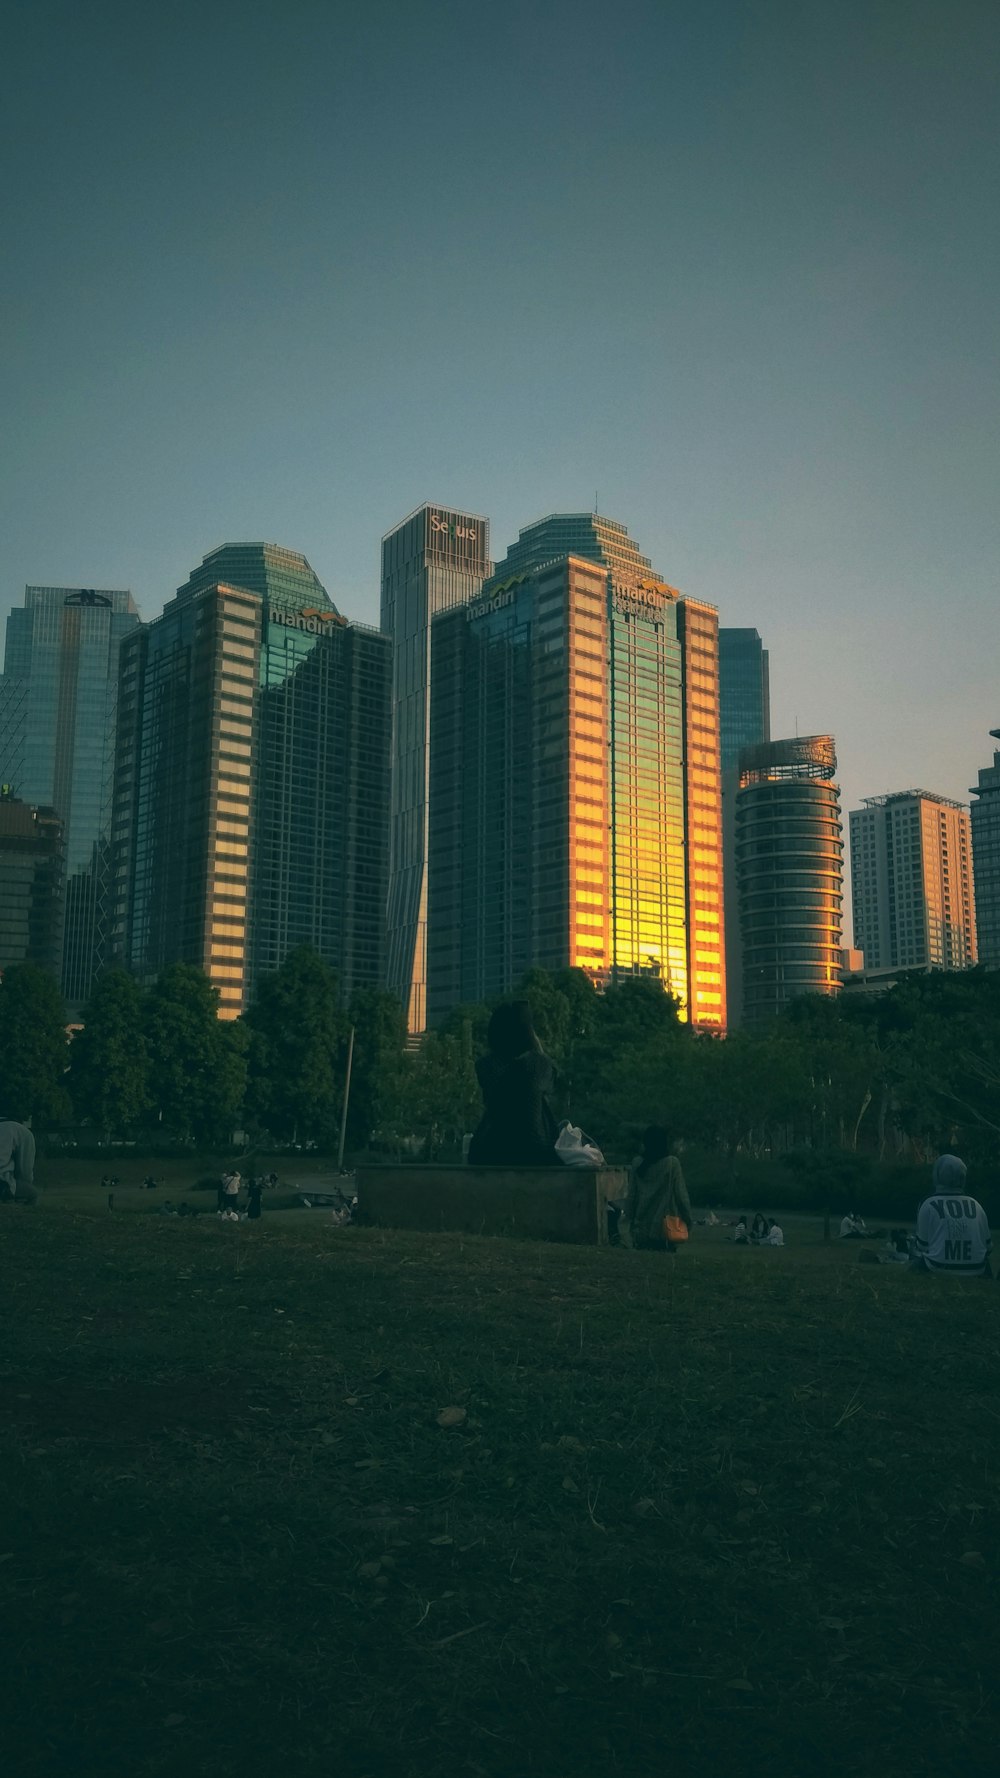 people sitting on grass field near high rise buildings during daytime